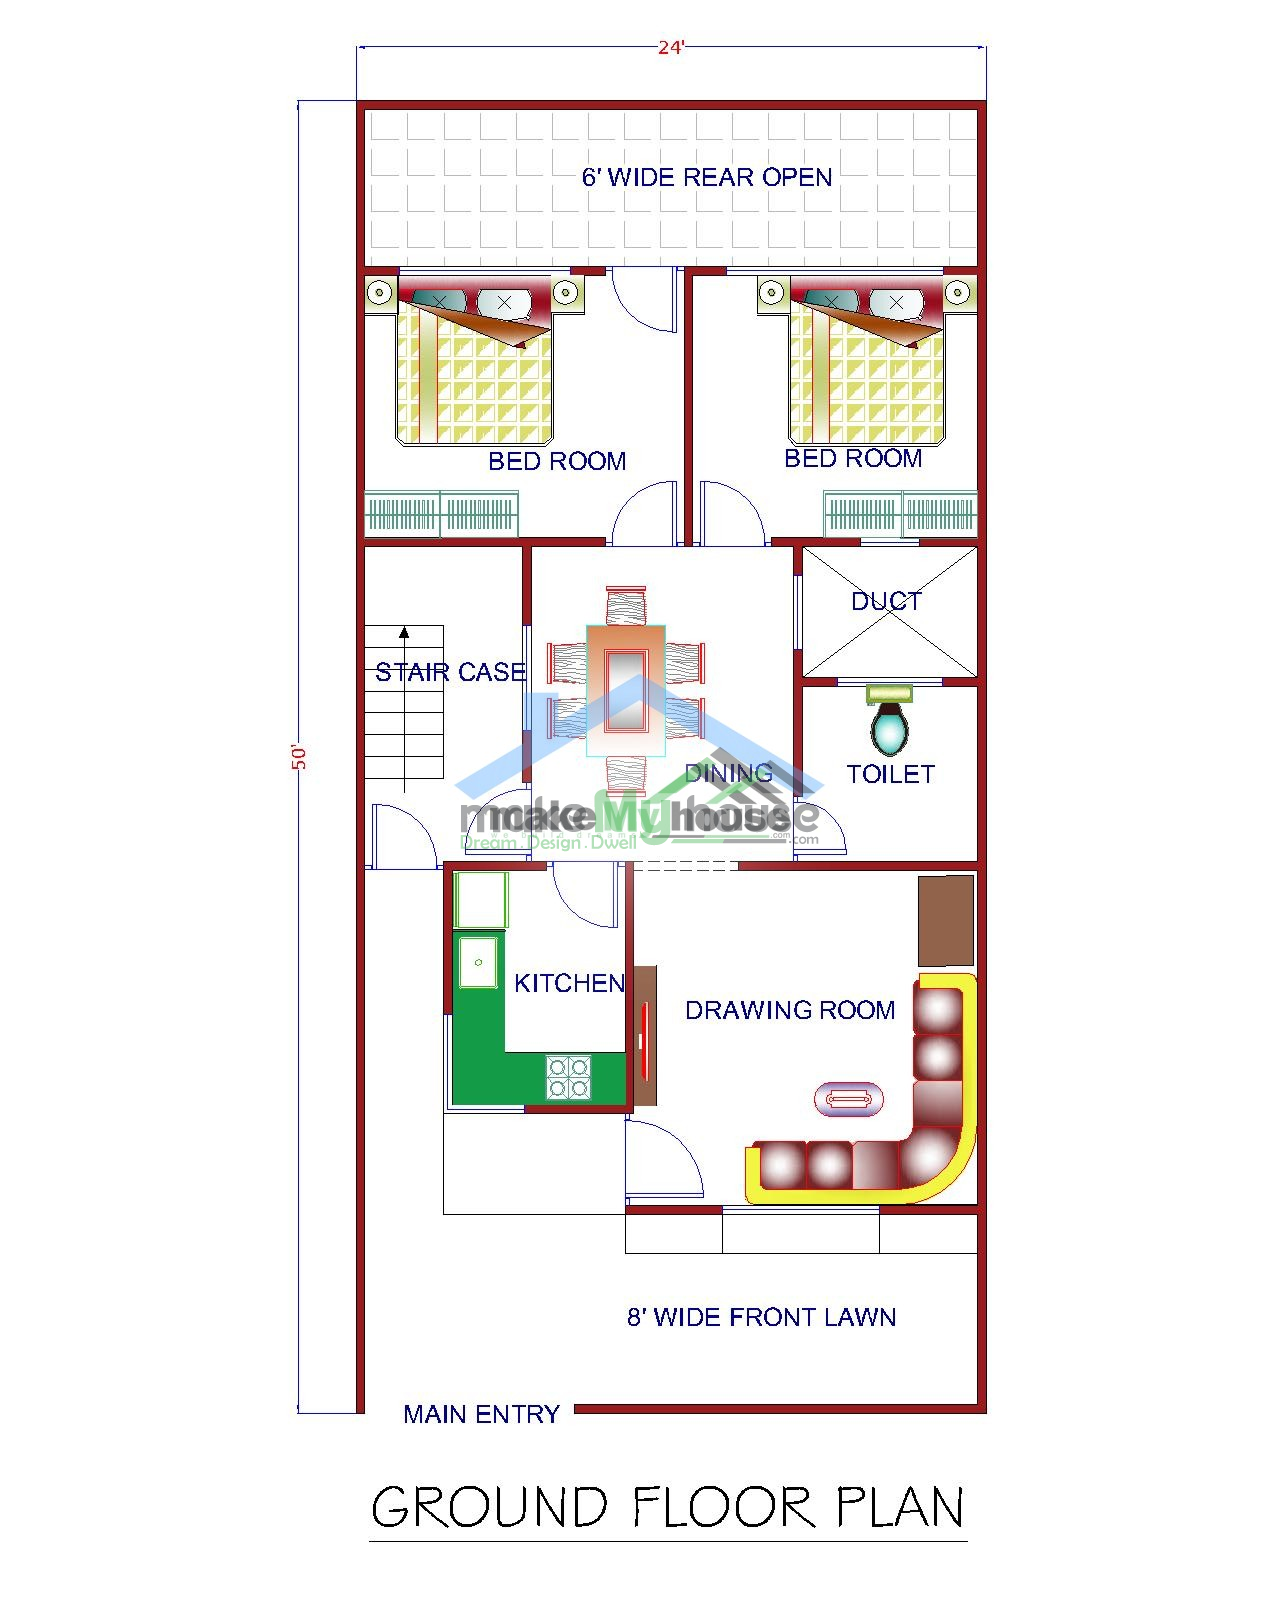 20X50 House Plan East Facing - jussie-mylittlefamily